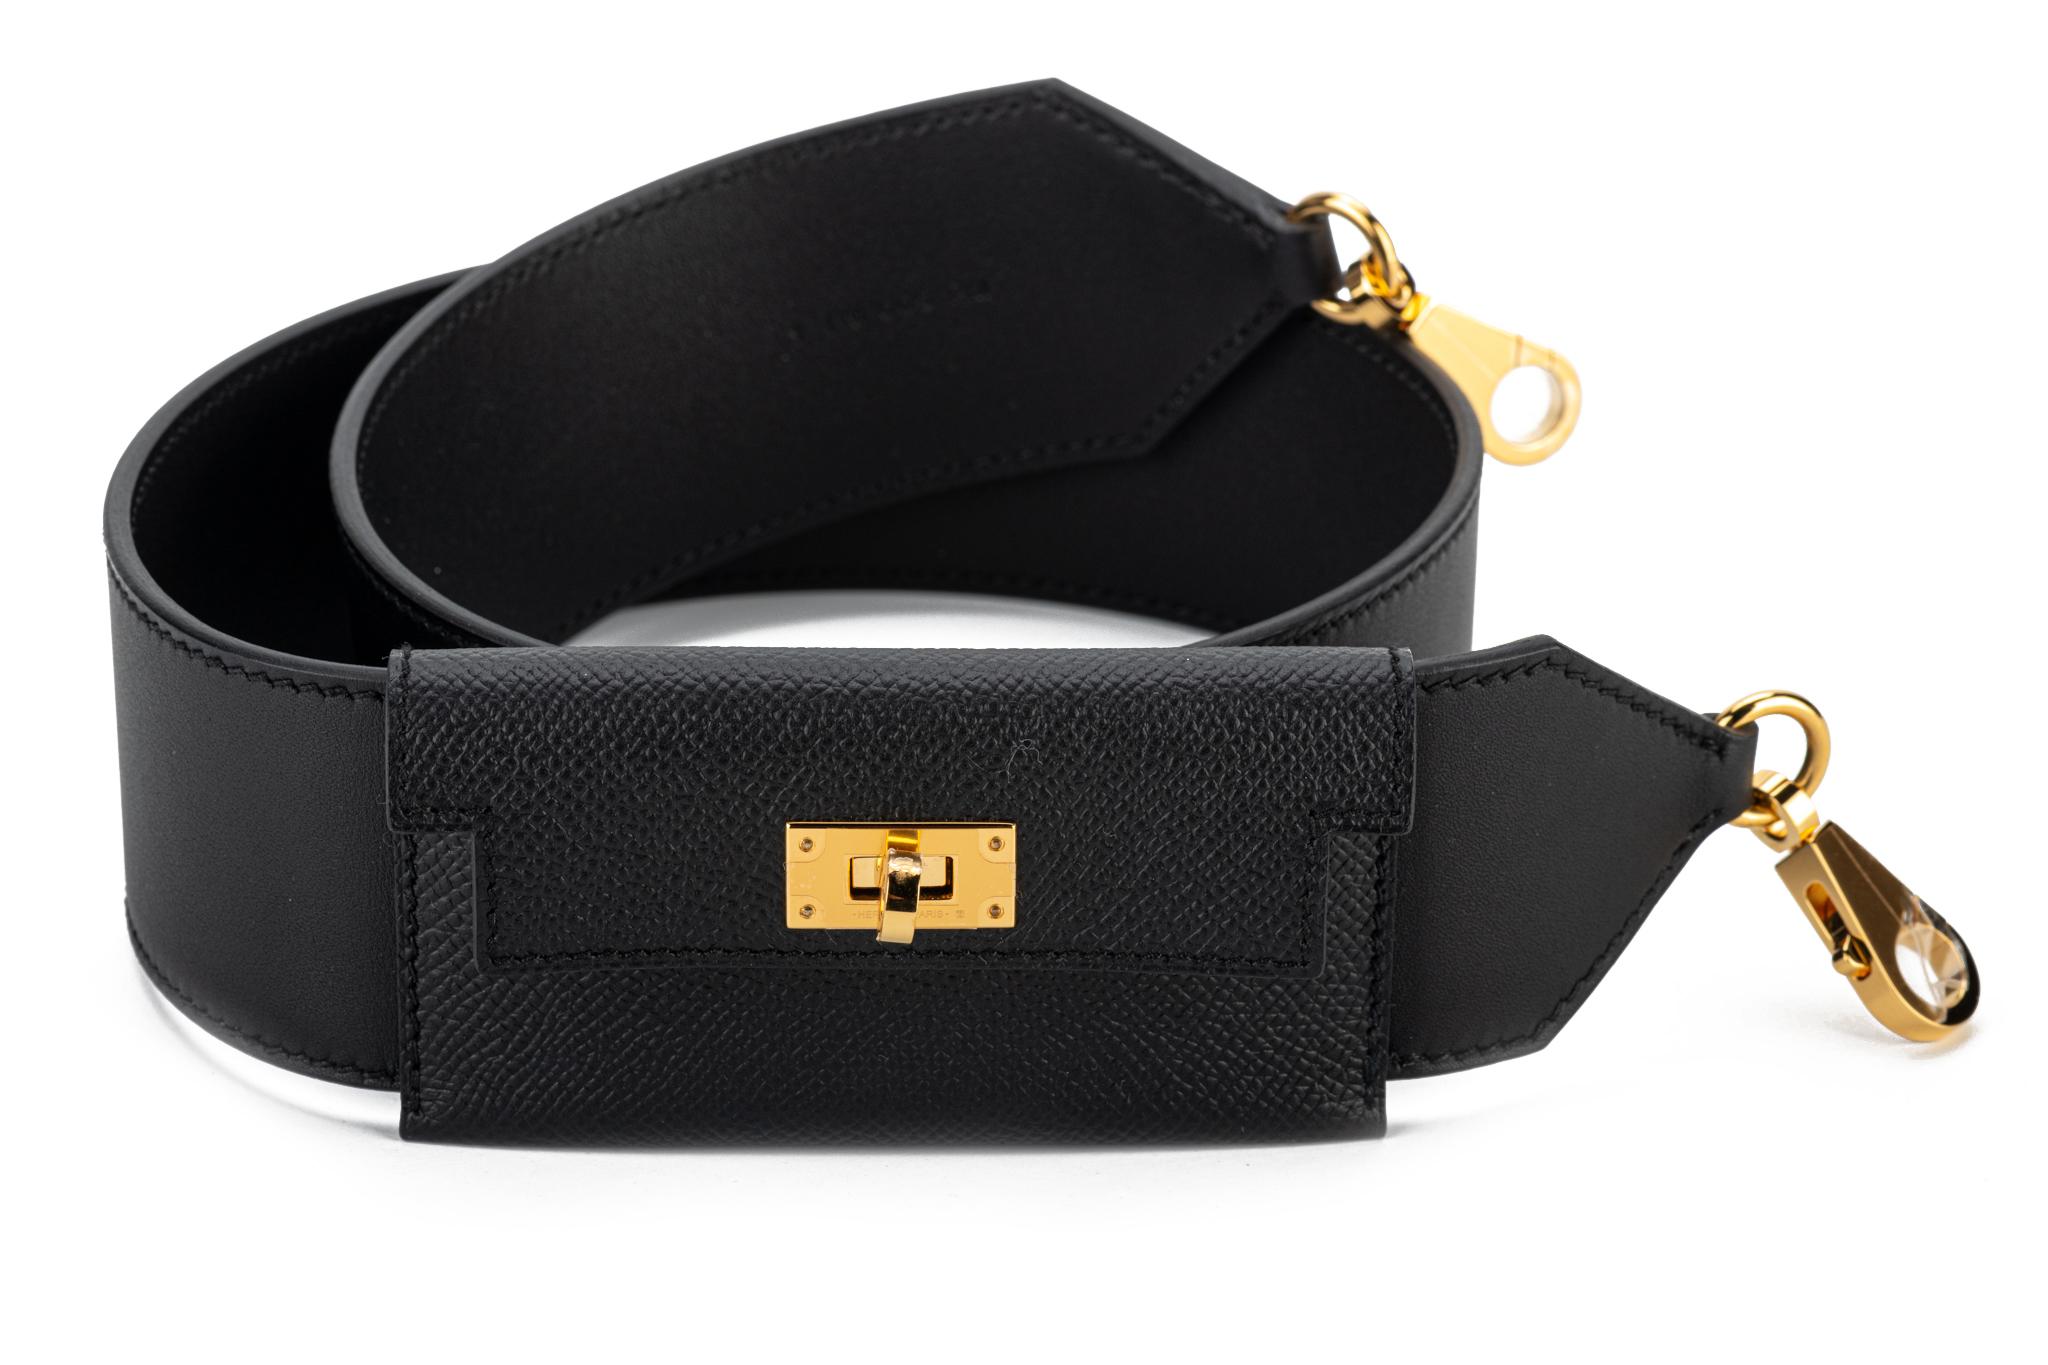 Hermès Kelly pochette bandouliere in black Epsom leather and goldtone hardware. New with original dust cover and box. Date stamp Z.